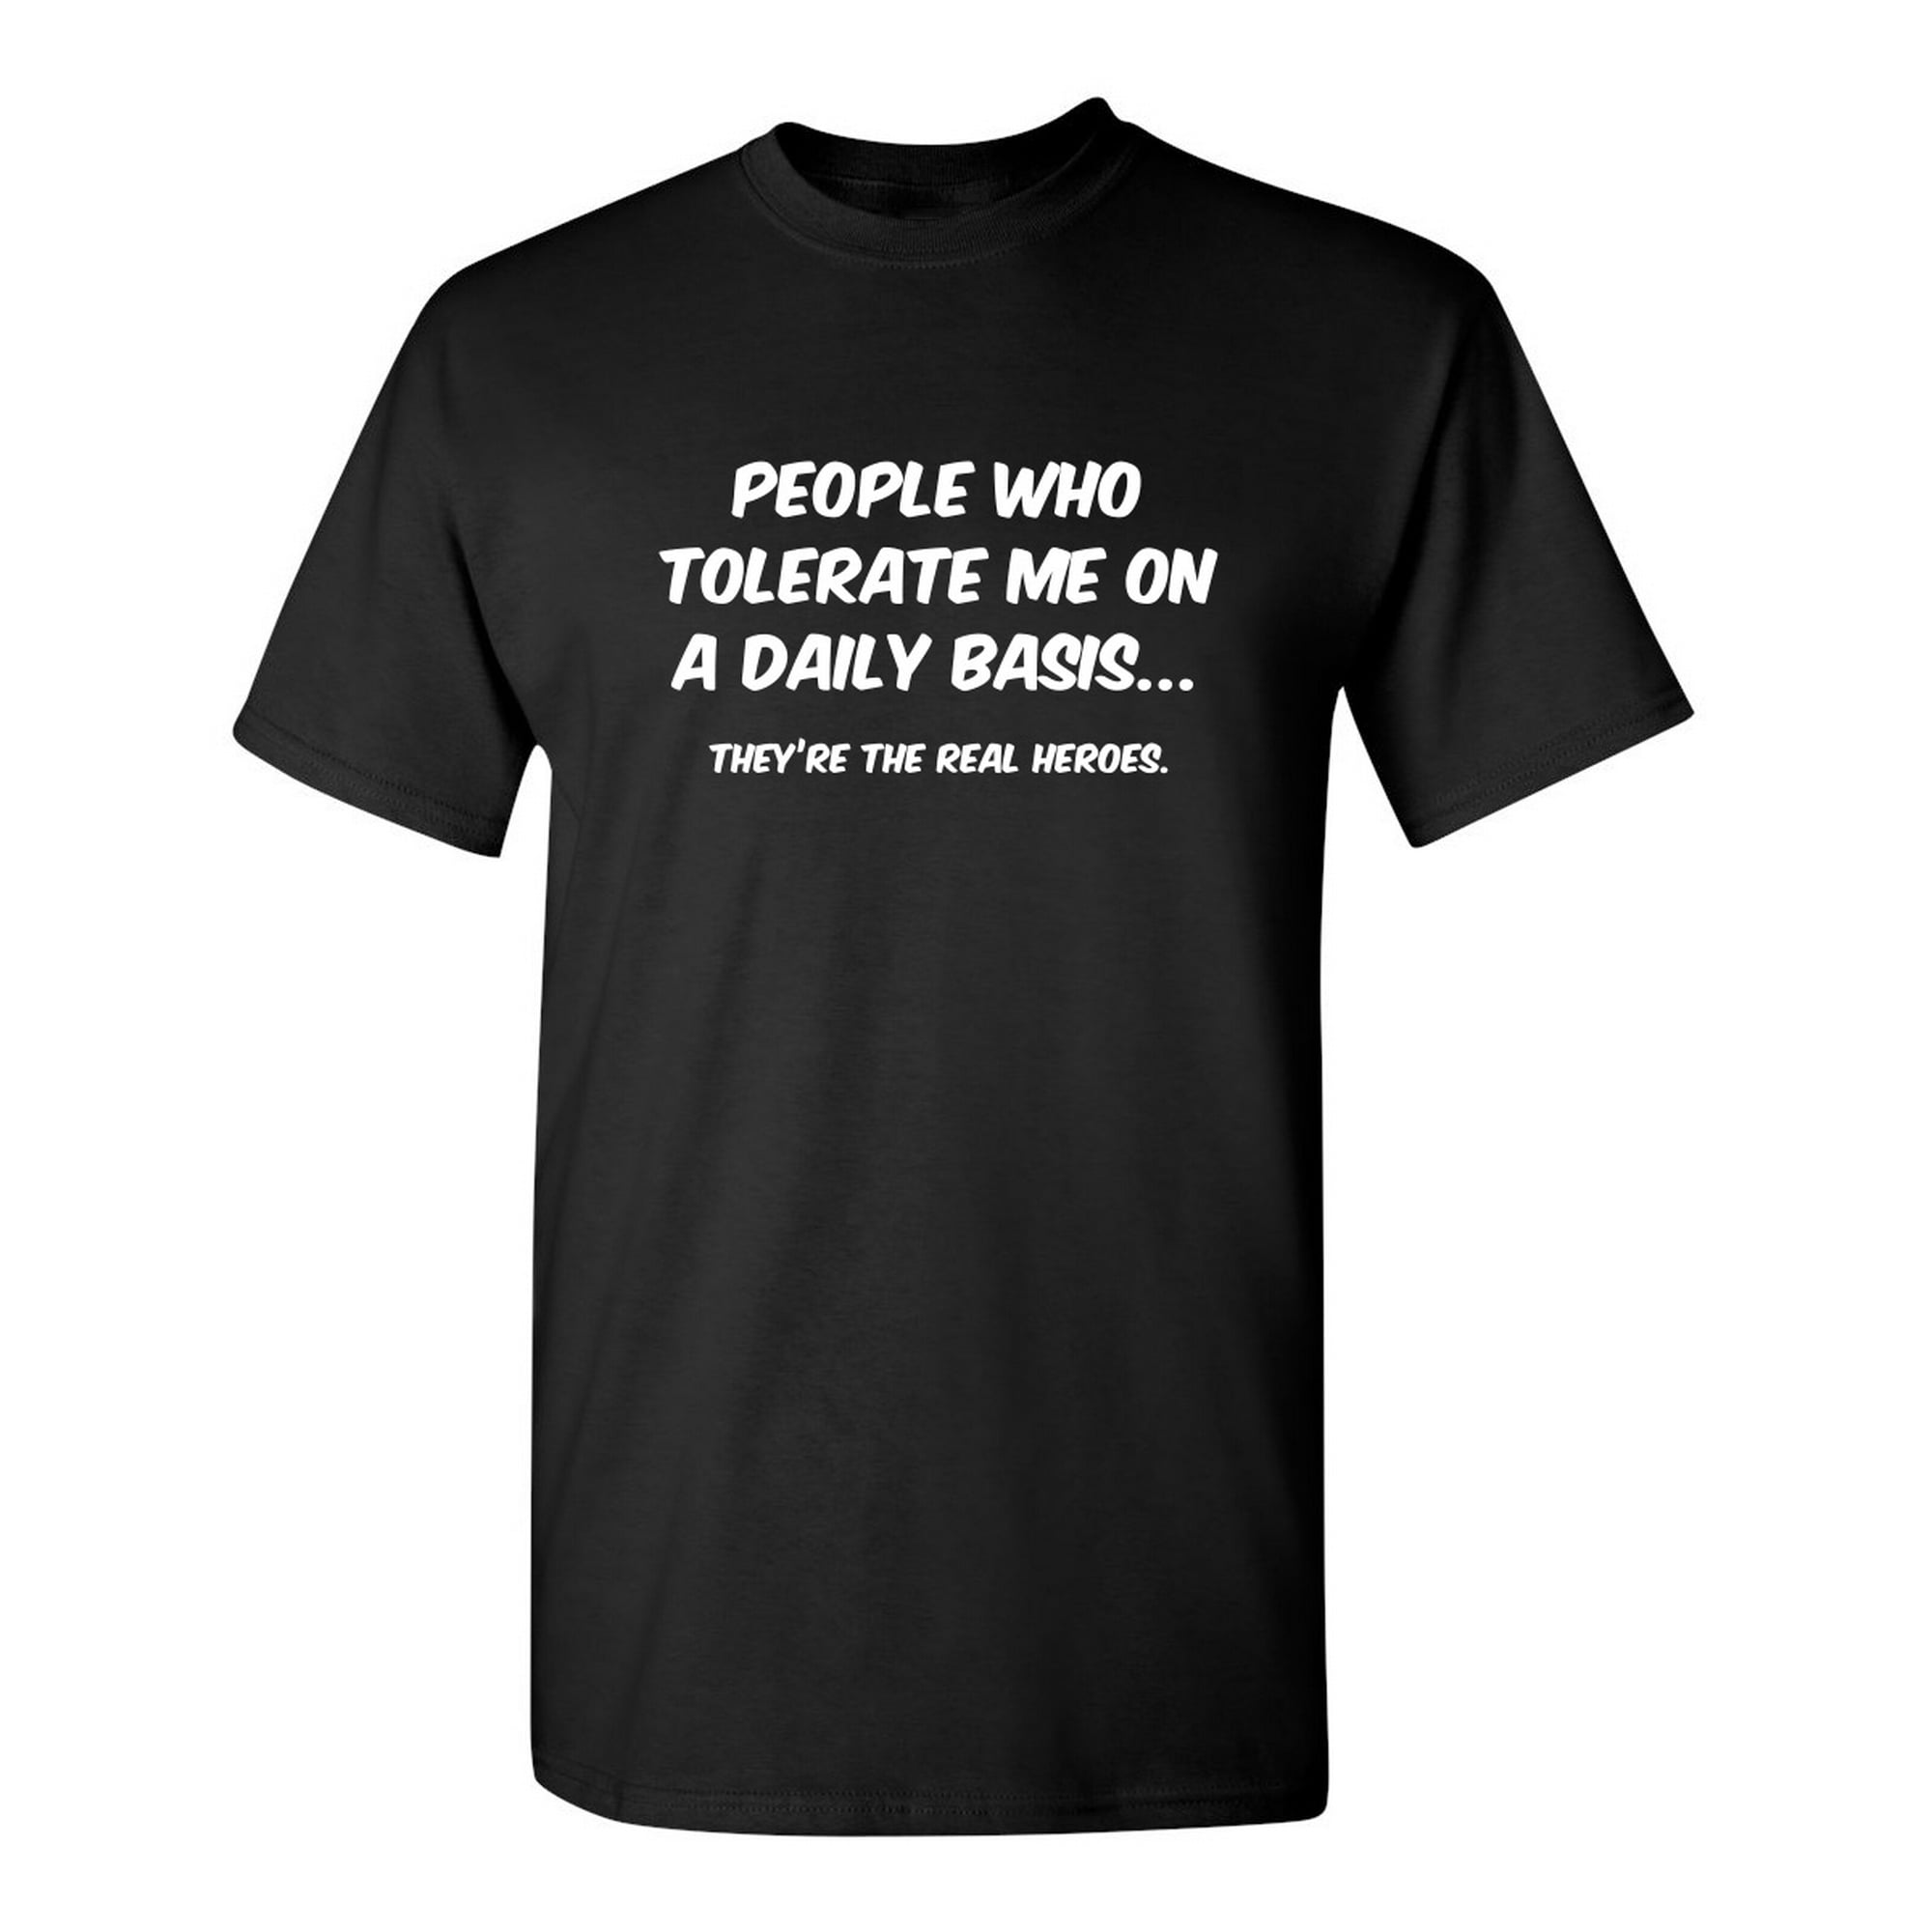 People Who Tolerate Me On A Basis Sarcastic Funny Graphic T Shirt Adult Humor Fit Well Tee Christmas Apparel Gift Birthday Anniversary Novelty Premium Tshirt - Walmart.com